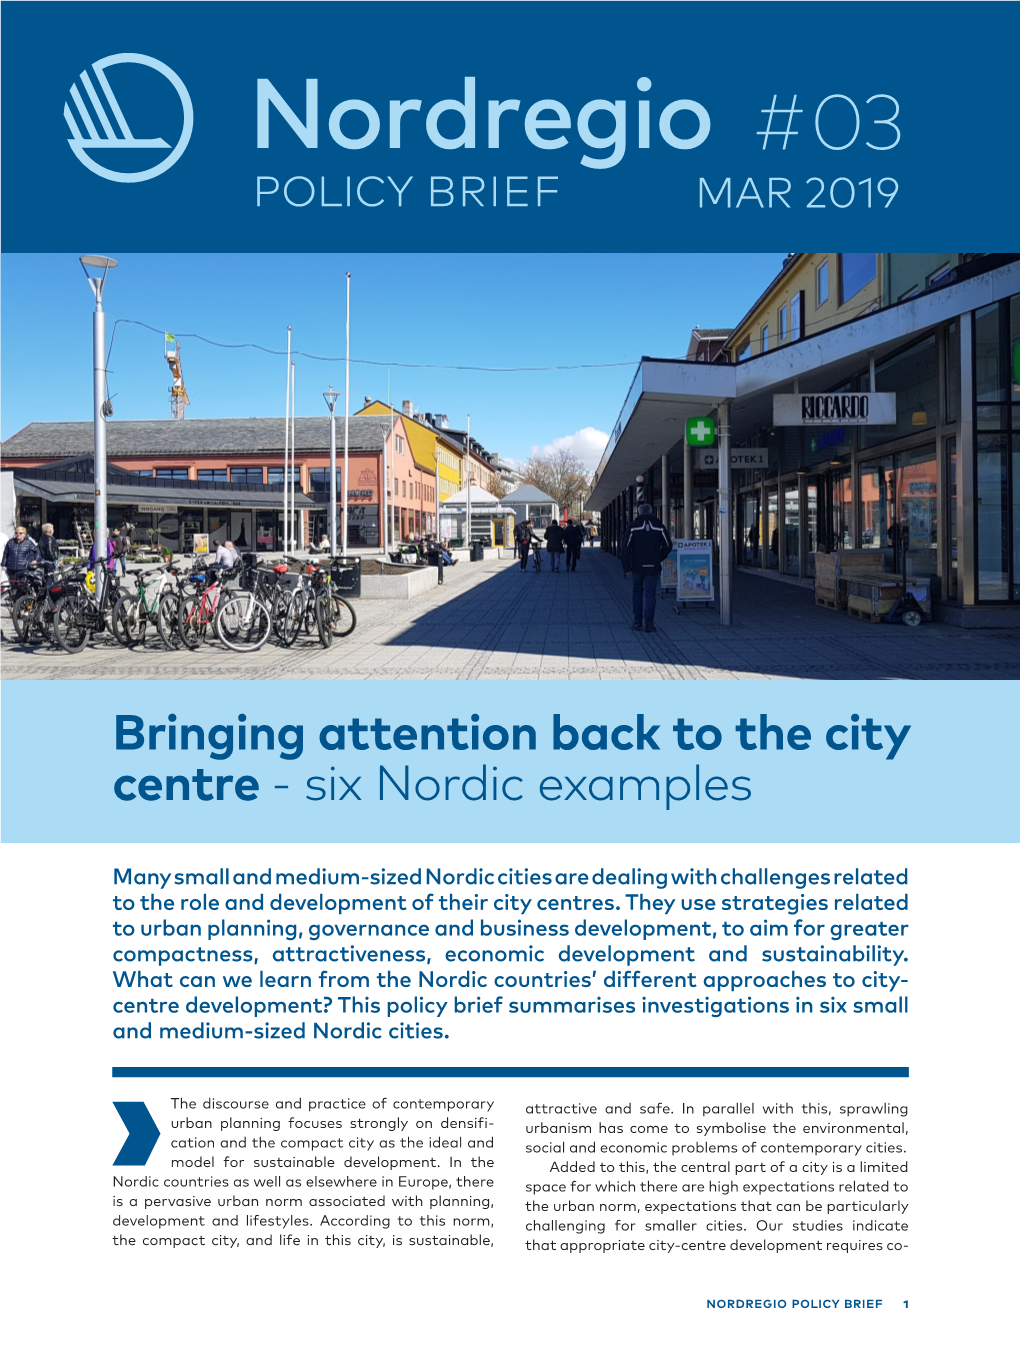 Bringing Attention Back to the City Centre - Six Nordic Examples